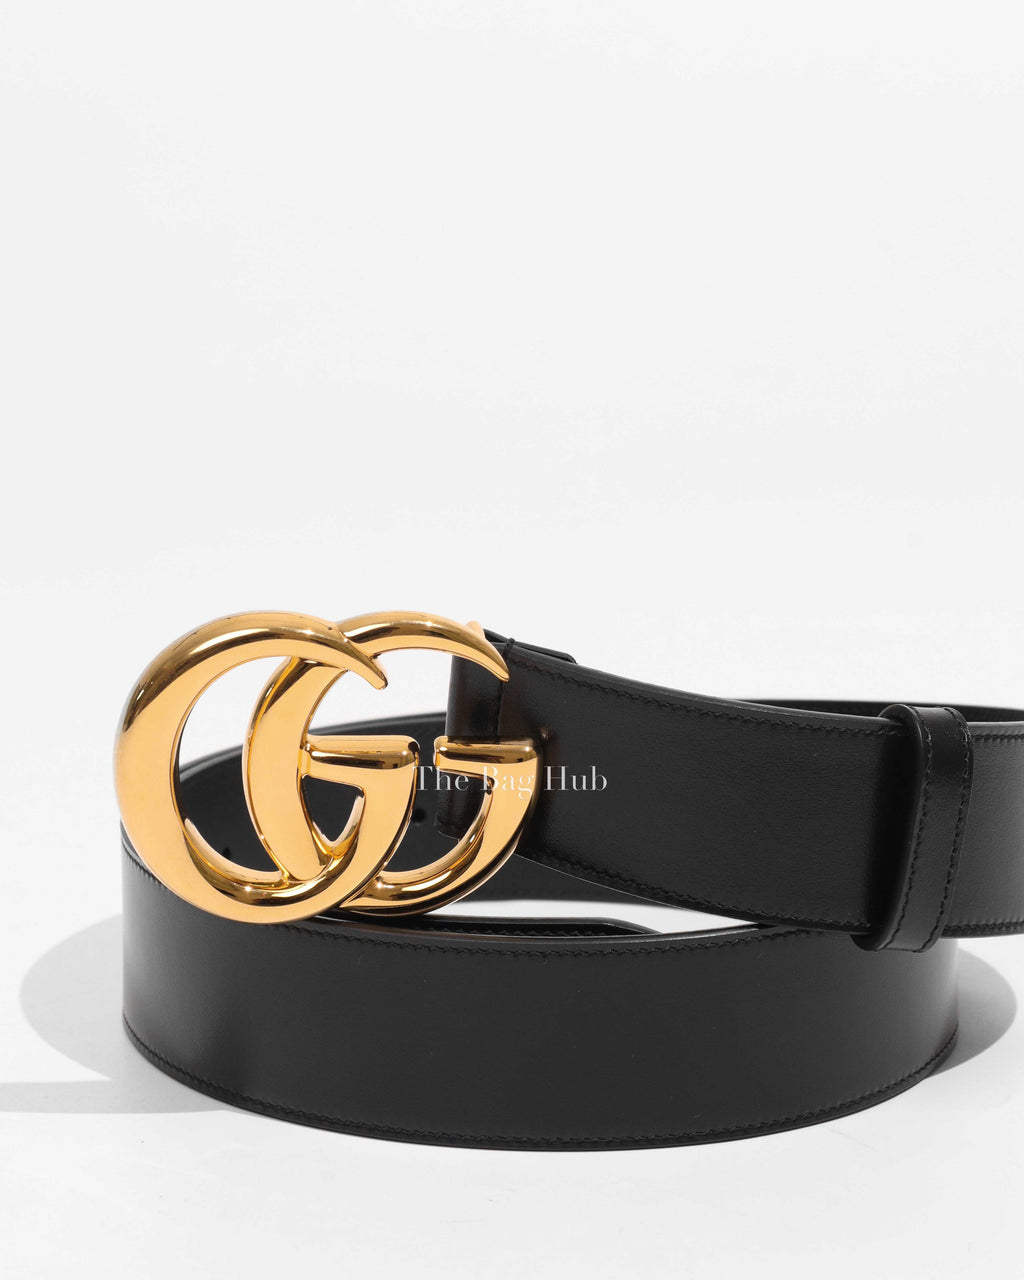 Gucci Black Leather GG Marmont Shiny Buckle Belt 95/38-1